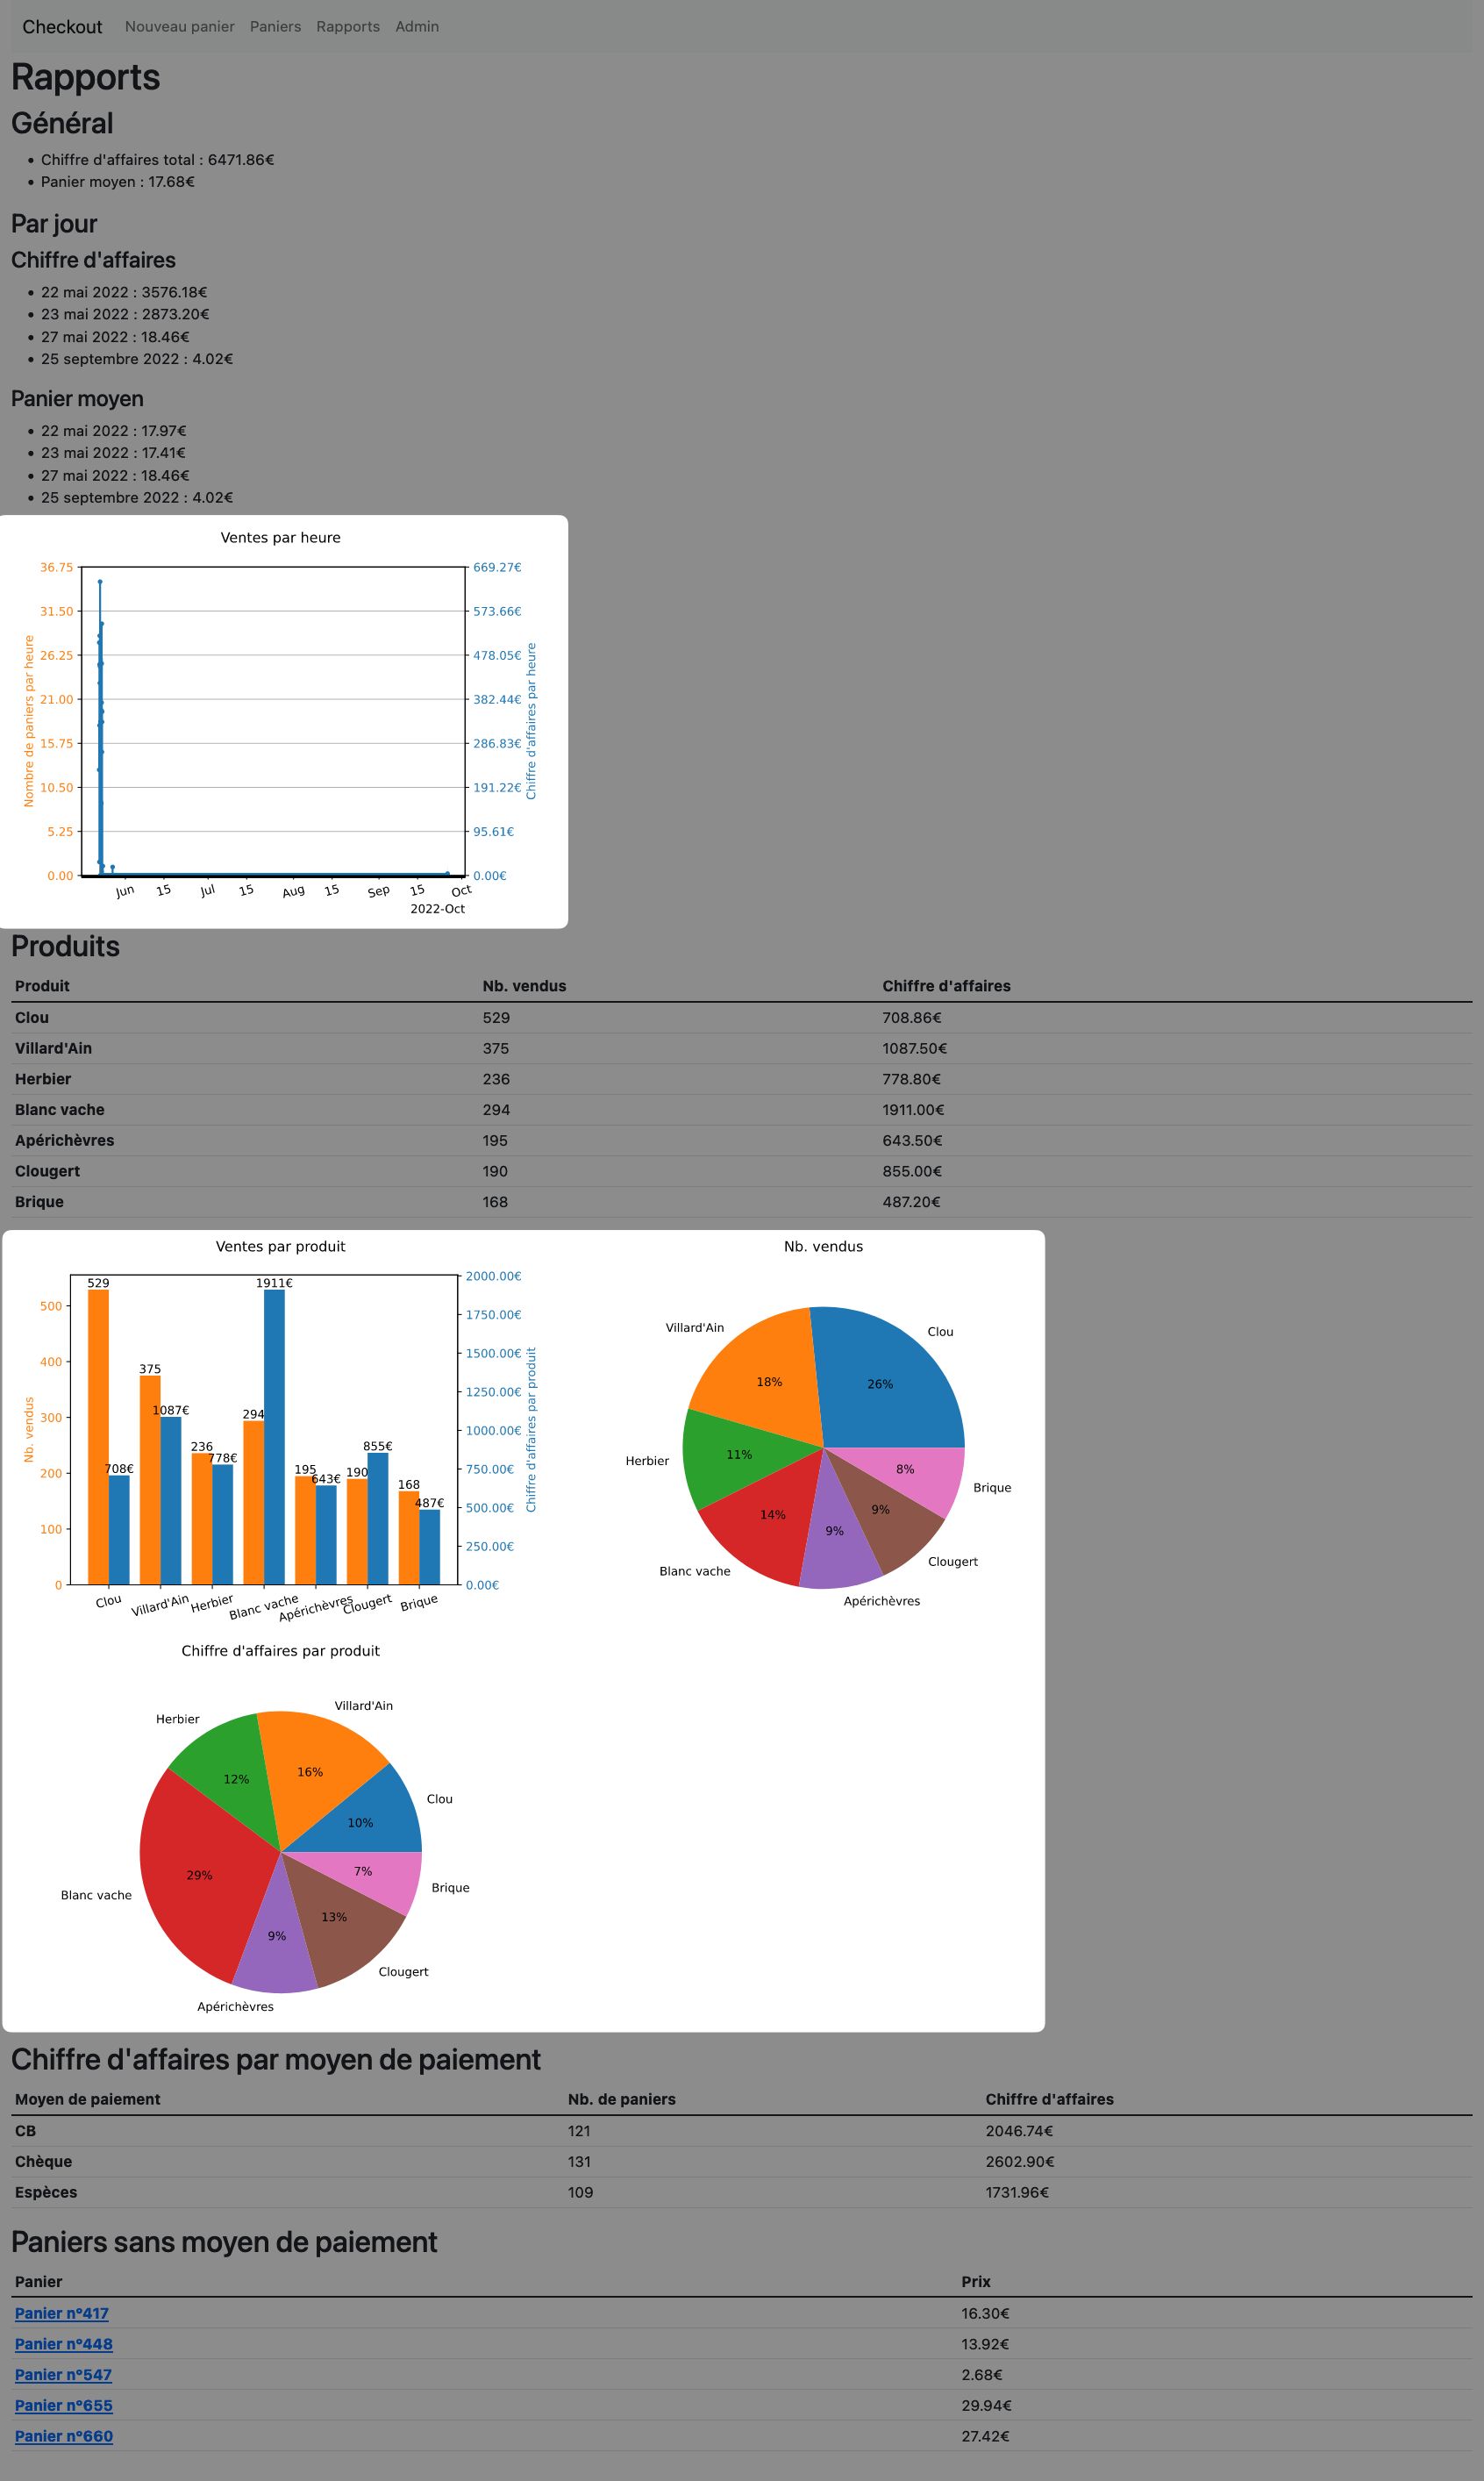 Checkout reports, some graphs highlighted